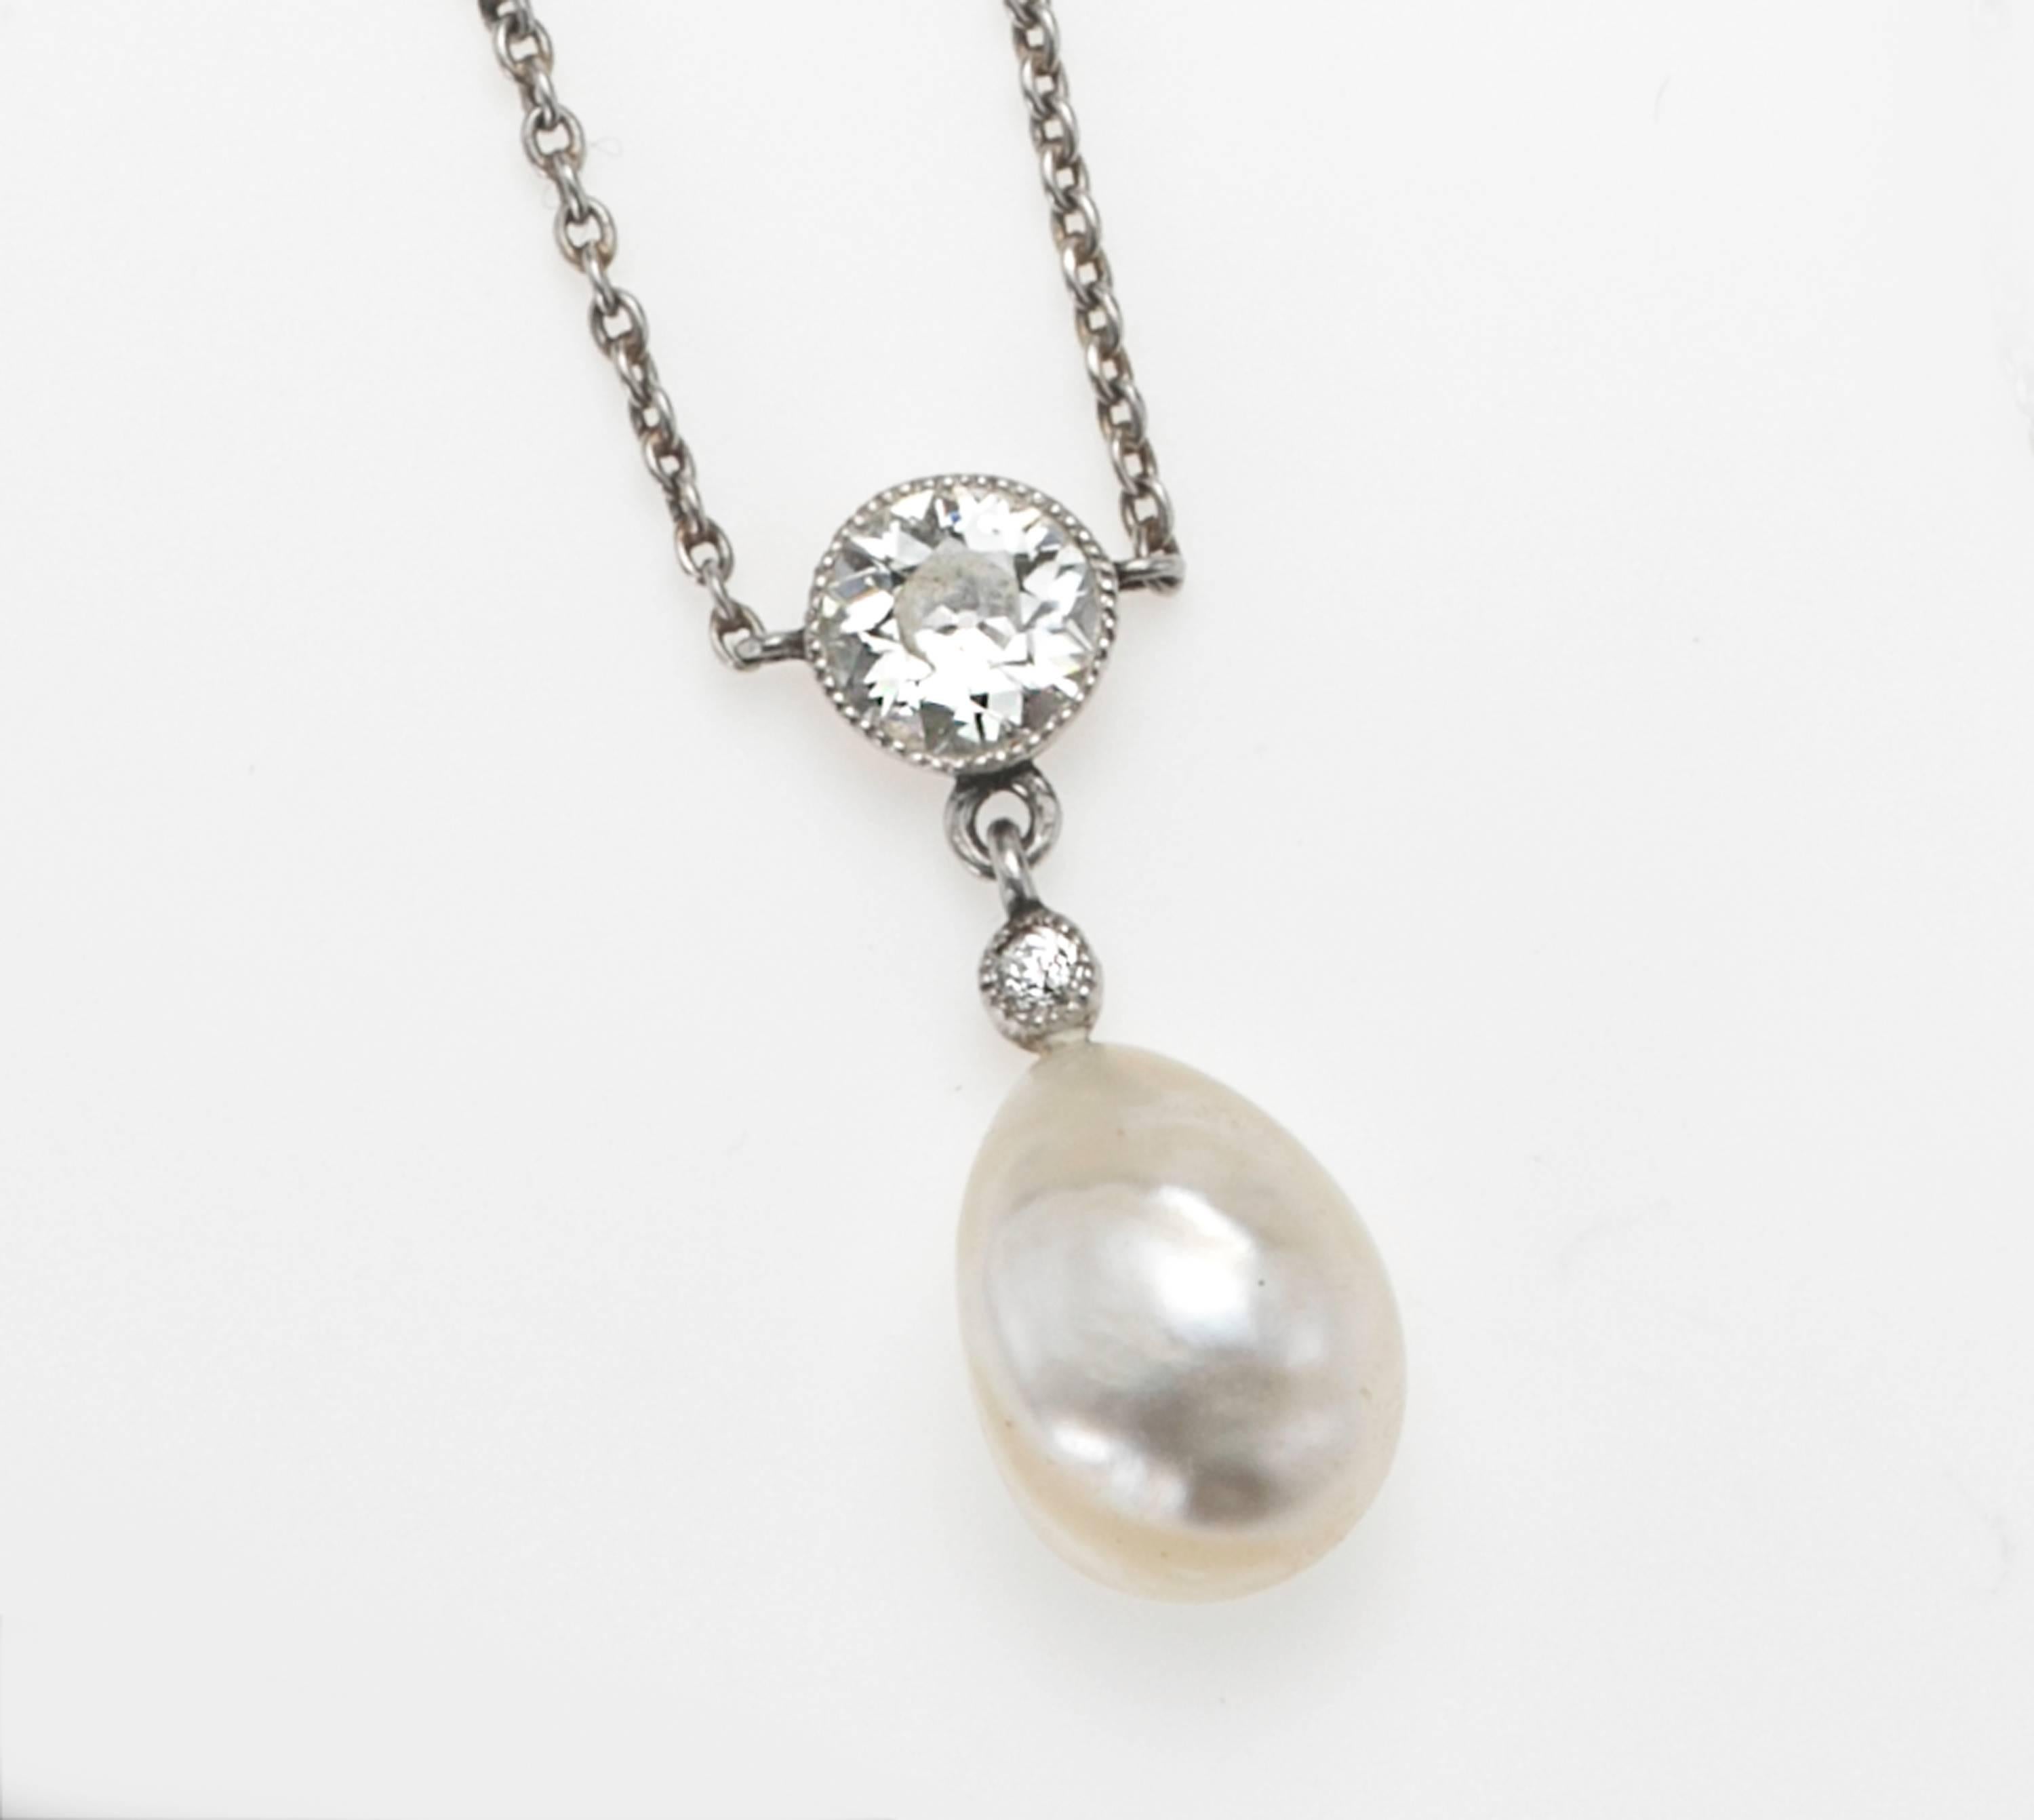 Platinum and gold Edwardian lavalier with Old Mine cut diamonds and a semi Baroque pearl.  No karat stamp is present and test indicates diamonds are set in both gold and platinum.  The pearl is set on a gold pin.  Chain is platinum 1.5 mm.cable link